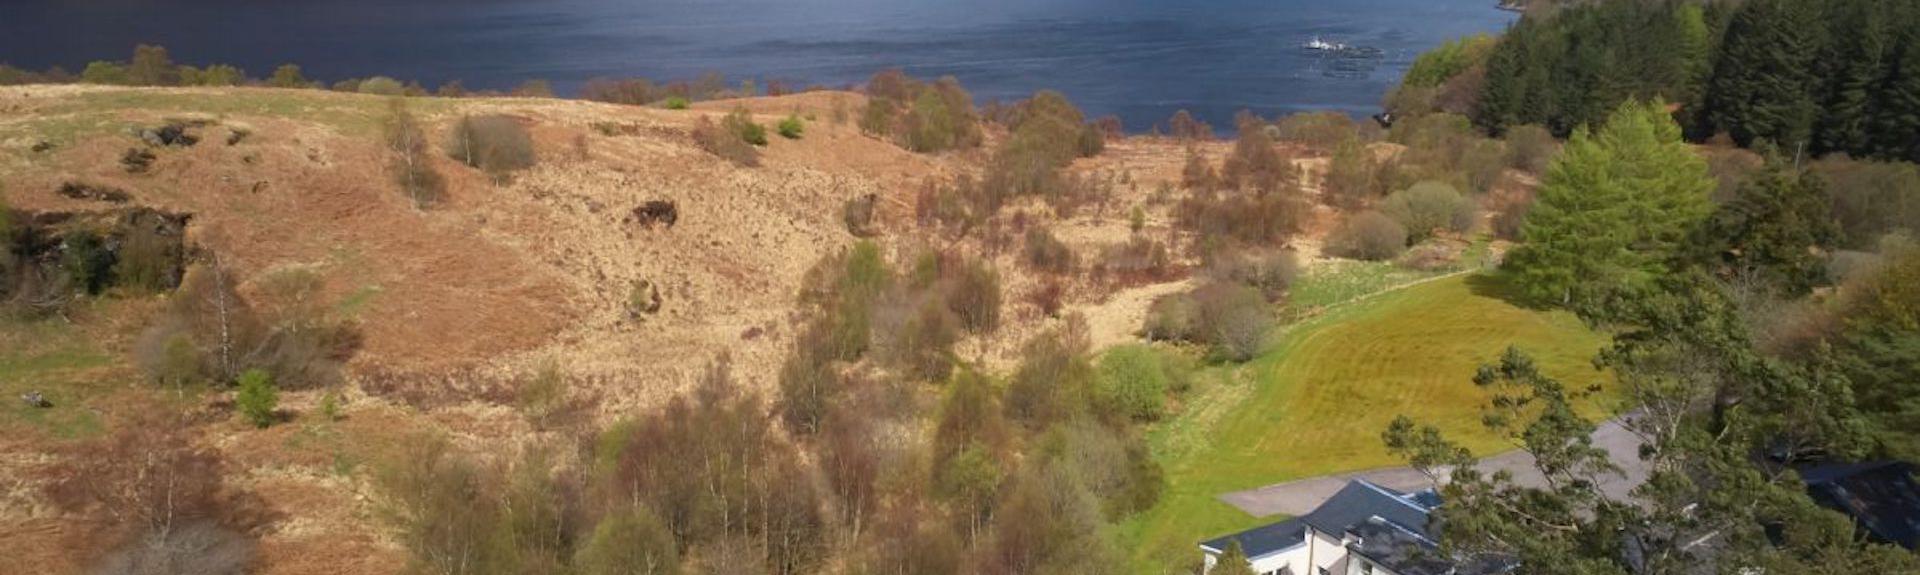 Aerial photo of a Loch in the Scottish Highlands with a holiday cottage in the foreground.